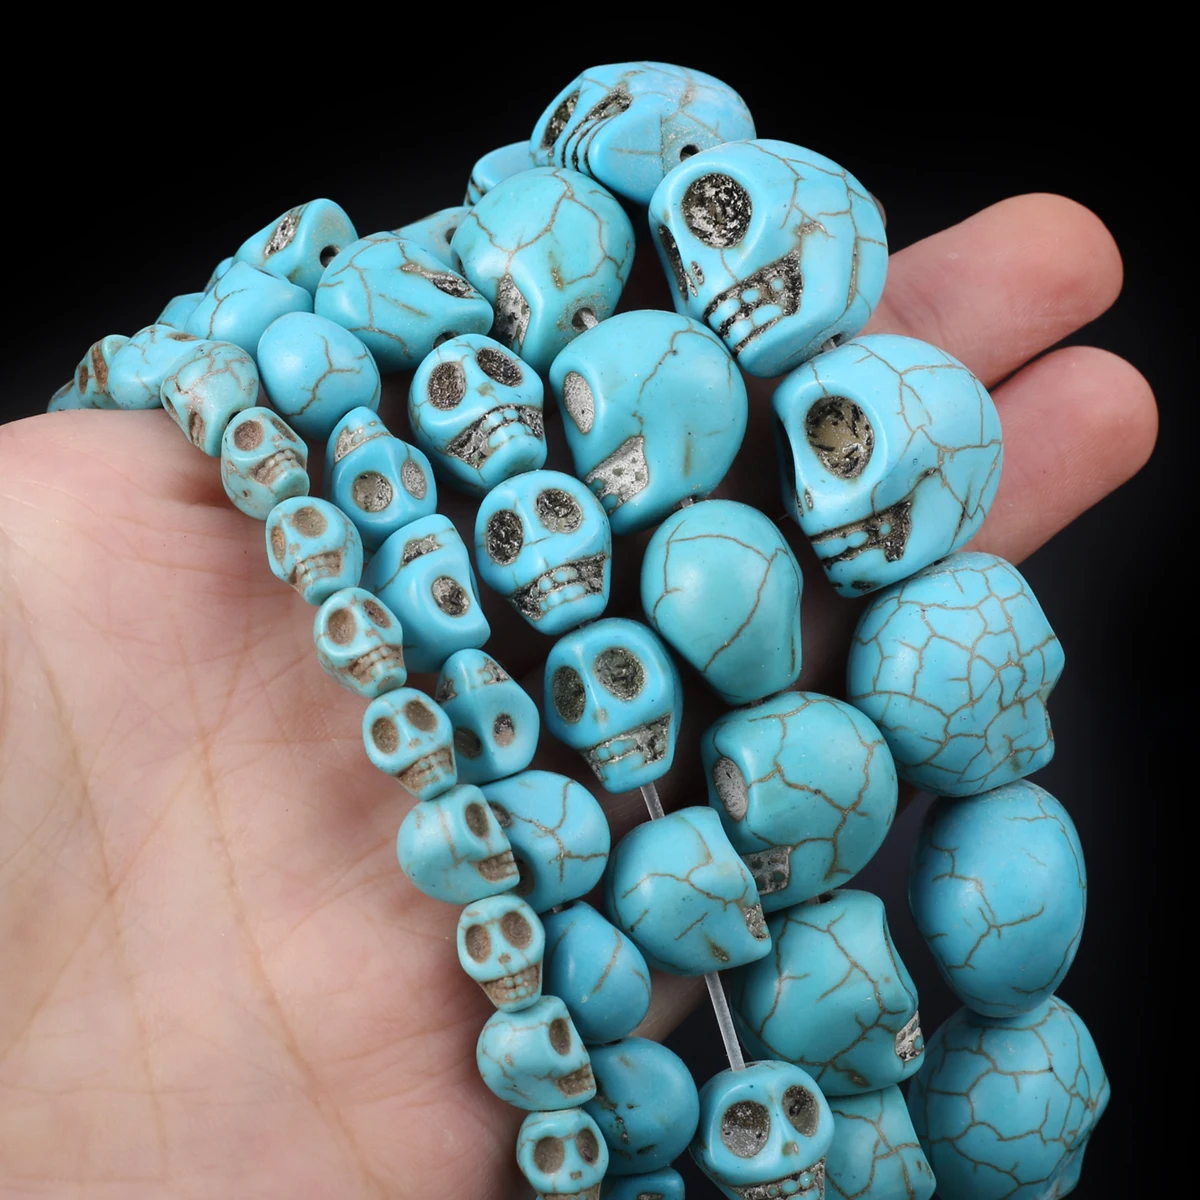 

Mixcolor Carved Skull Turquoise Beads Natural Stone Howlite Semi-finished Loose Beads for Jewelry Making DIY Bracelet Earrings